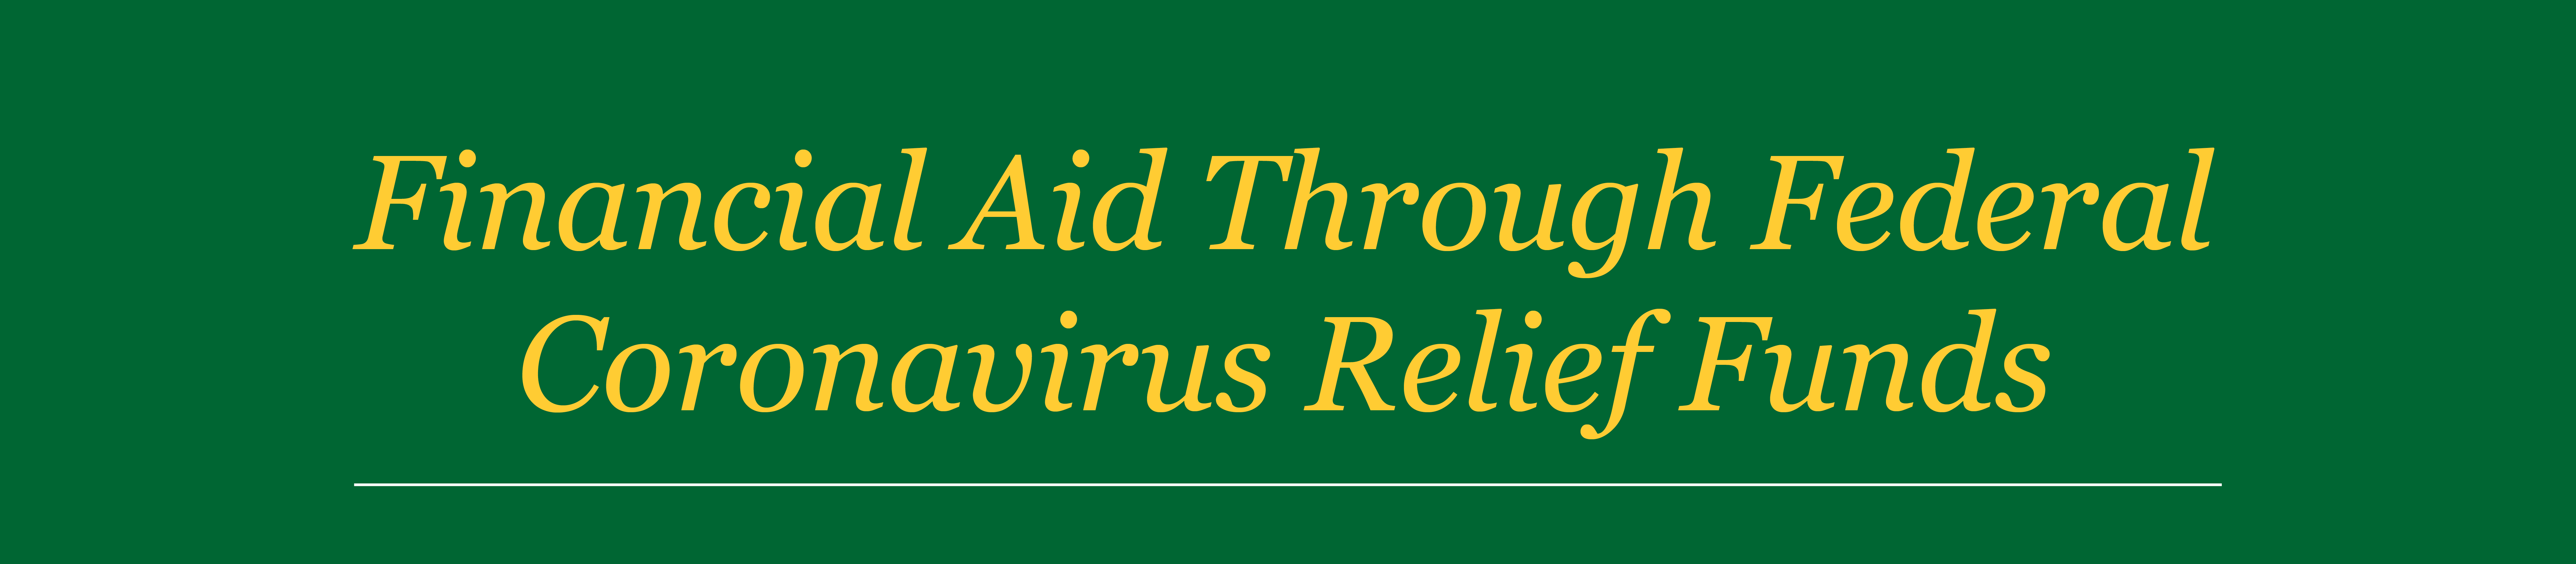 Financial Aid as Coronavirus Relief Funds